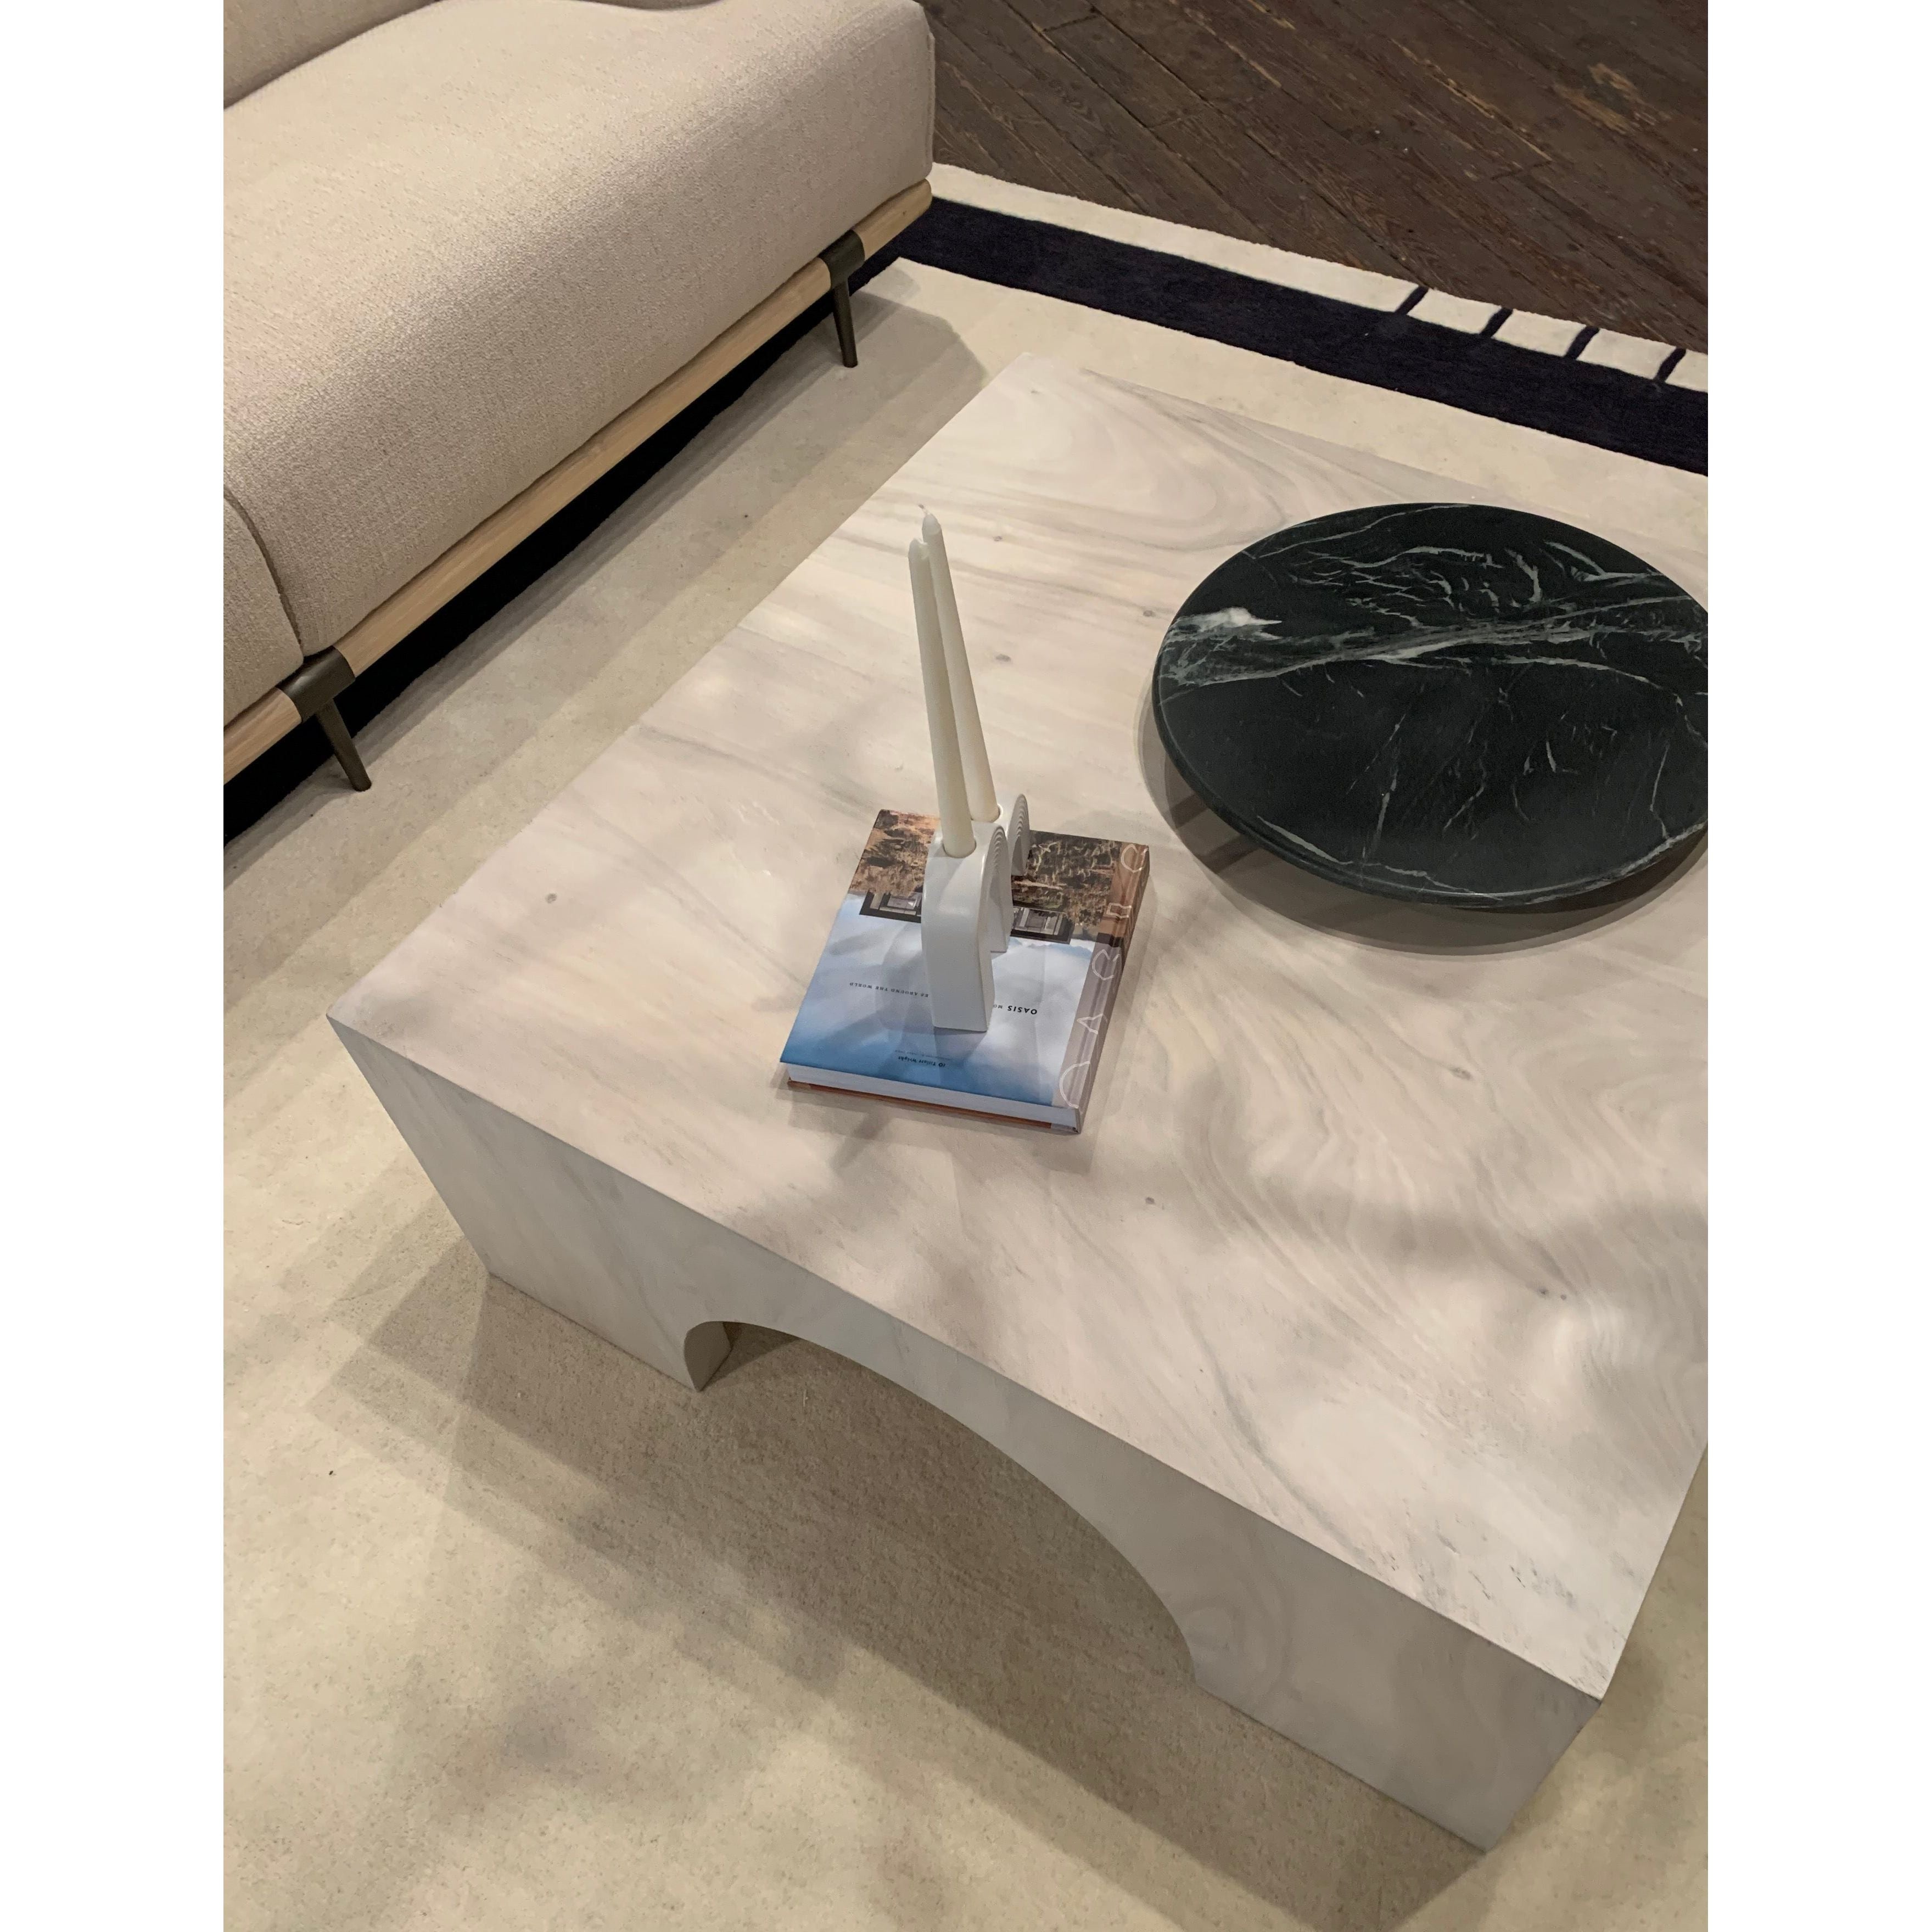 We love how clean and simple this Fausto Coffee Table -  Bleached Guanacaste is. Made from beautiful bleached Guanacaste, shapely arches and block corners speak to the architectural inspiration behind this eye-catching coffee table.  Overall Dimensions: 40.00"w x 40.00"d x 16.00"h